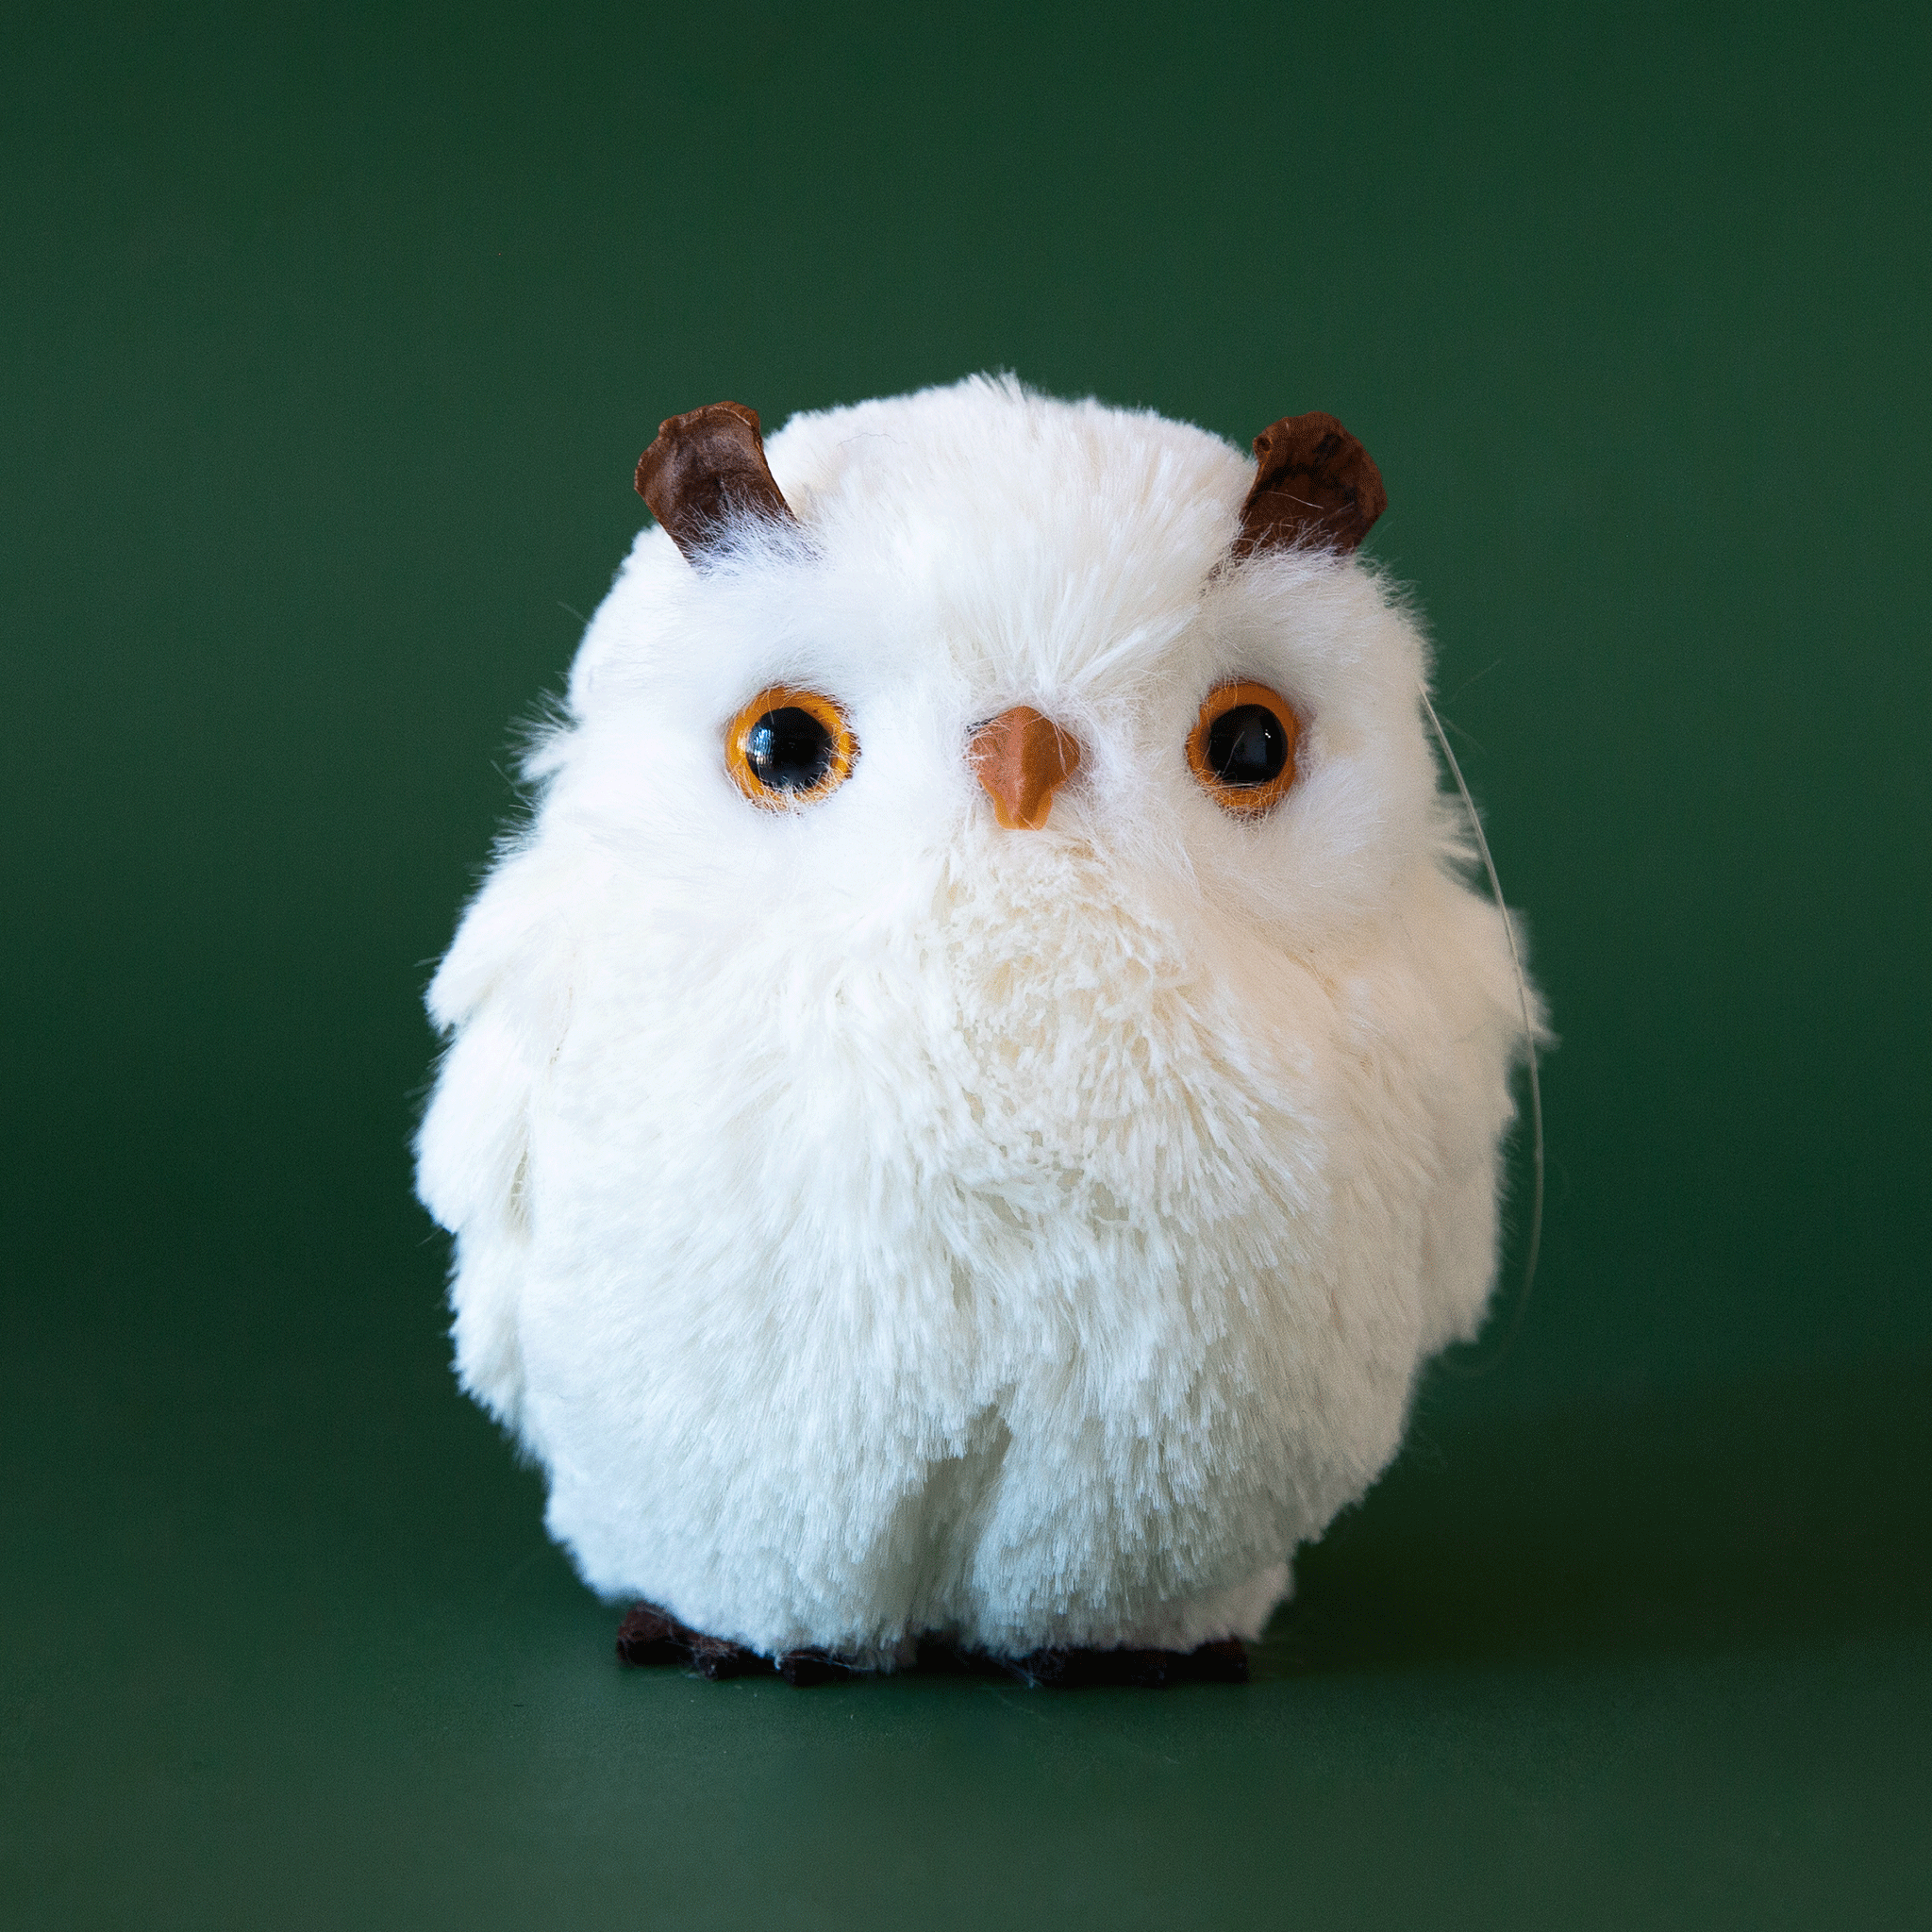 On a green background is a white fur owl ornament.